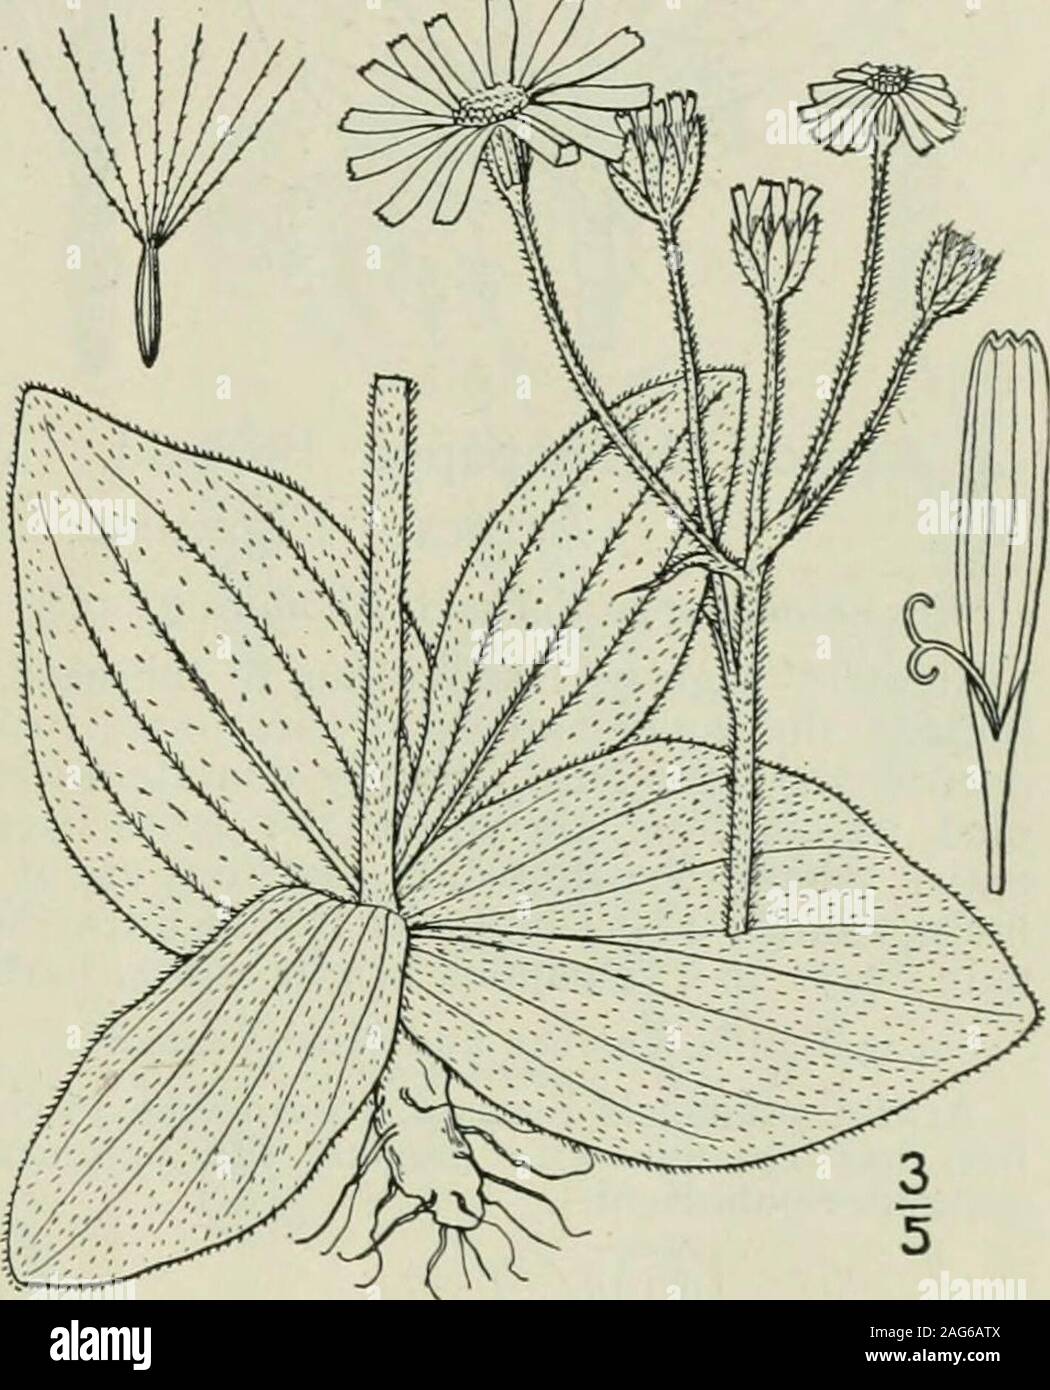 . An illustrated flora of the northern United States, Canada and the British possessions : from Newfoundland to the parallel of the southern boundary of Virginia and from the Atlantic Ocean westward to the 102nd meridian. 2. Arnica cordifolia Hook. Heart-leaf Arnica. Fig. 4600. Arnica cordifolia Hook. Fl. Bor. Am. i : 331.1833. Villous or pubescent; stem simple orsparingly branched, glandular above, i°-2high. Basal and lower leaves ovate tonearly orbicular, obtuse or acute, deeplycordate at the base, dentate. i-3 long,with slender sometimes margined petioles;stem leaves 1-3 pairs, ovate to obl Stock Photo